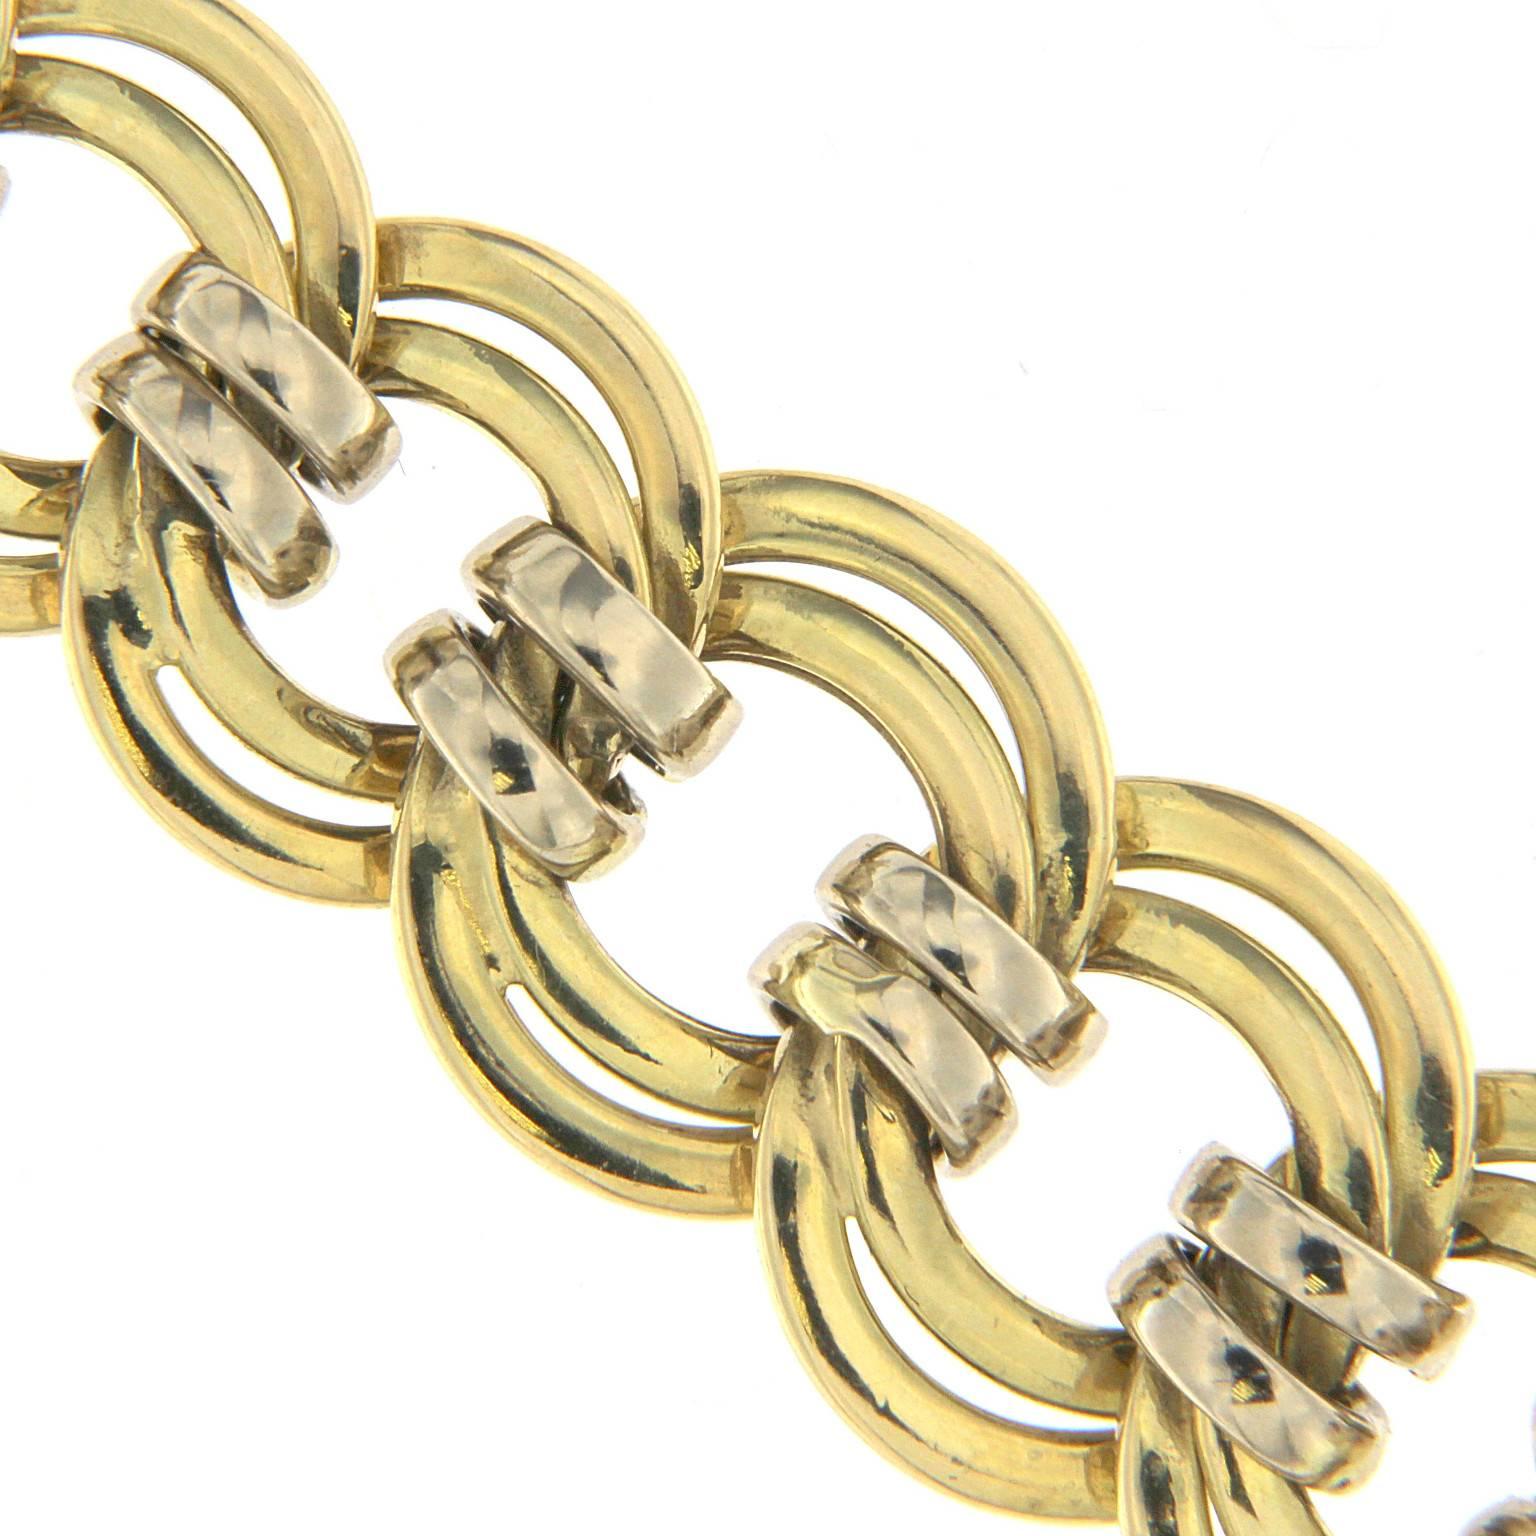 Chained necklace with double wire groumette enriched by double wires that overlap the design of the groumette so realizing a very refined design effect.
18 kt yellow gold - Total weight :  GR 28.70
Stamp 750
